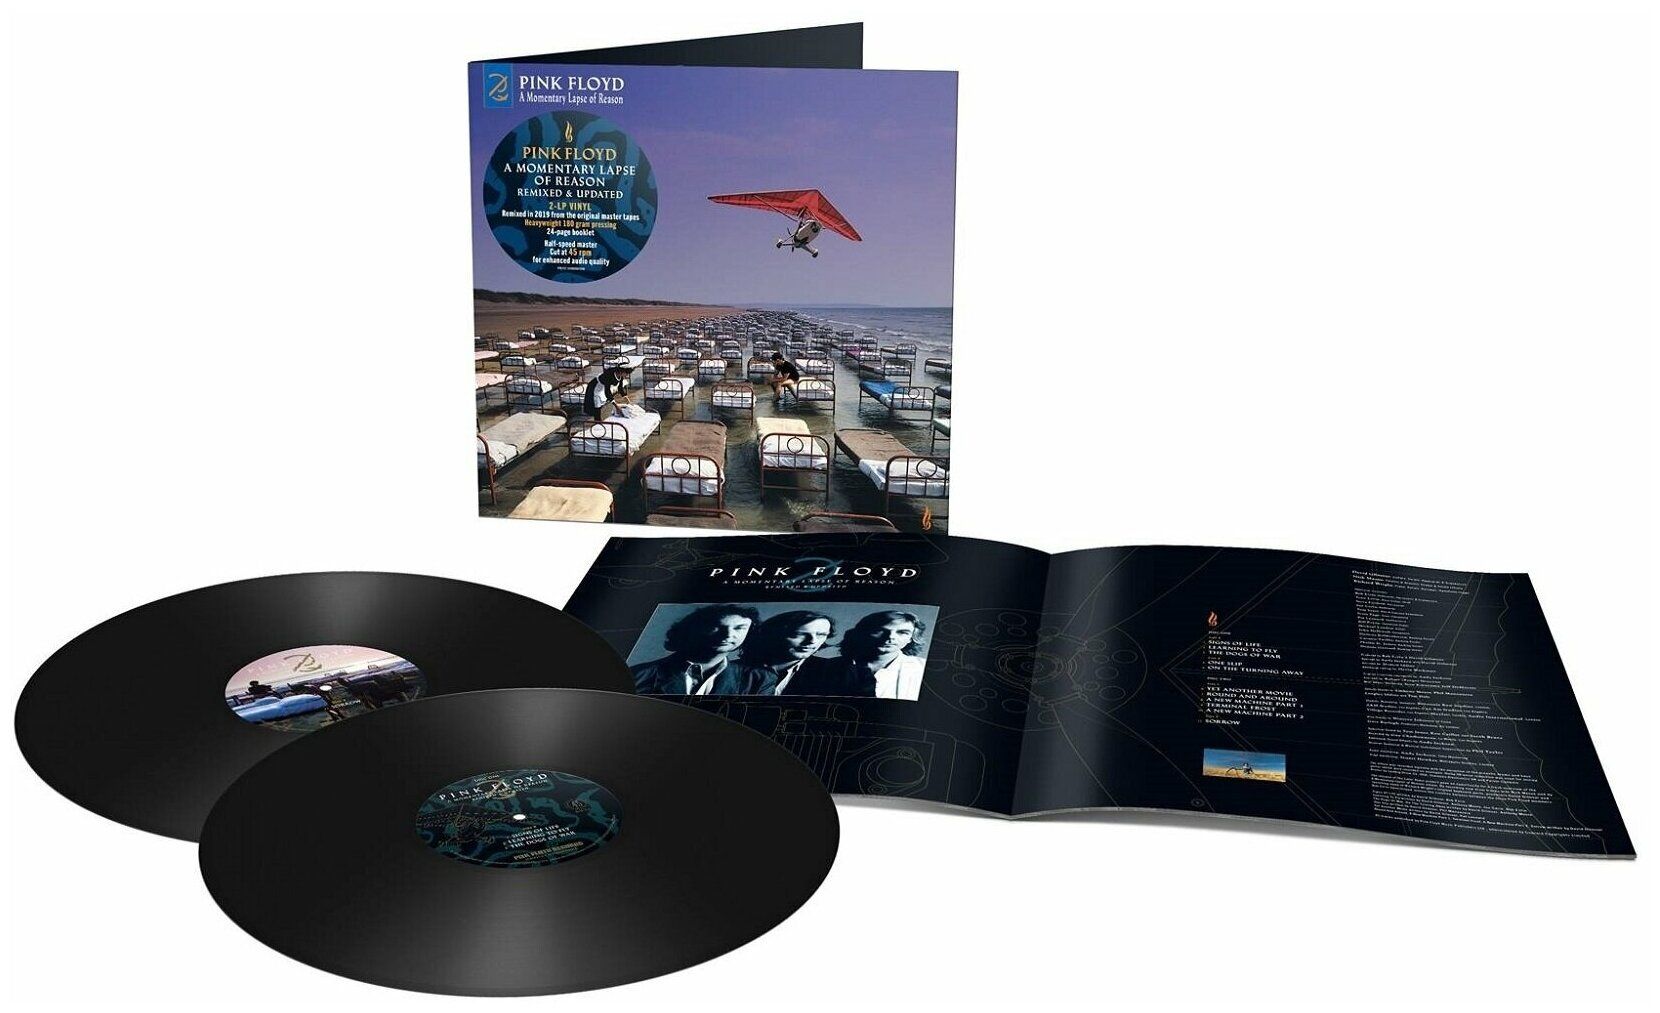 Виниловая пластинка Pink Floyd, A Momentary Lapse Of Reason (Remixed & Updated) (0190295079208) компакт диск warner music pink floyd the best of the later years 1987 2019